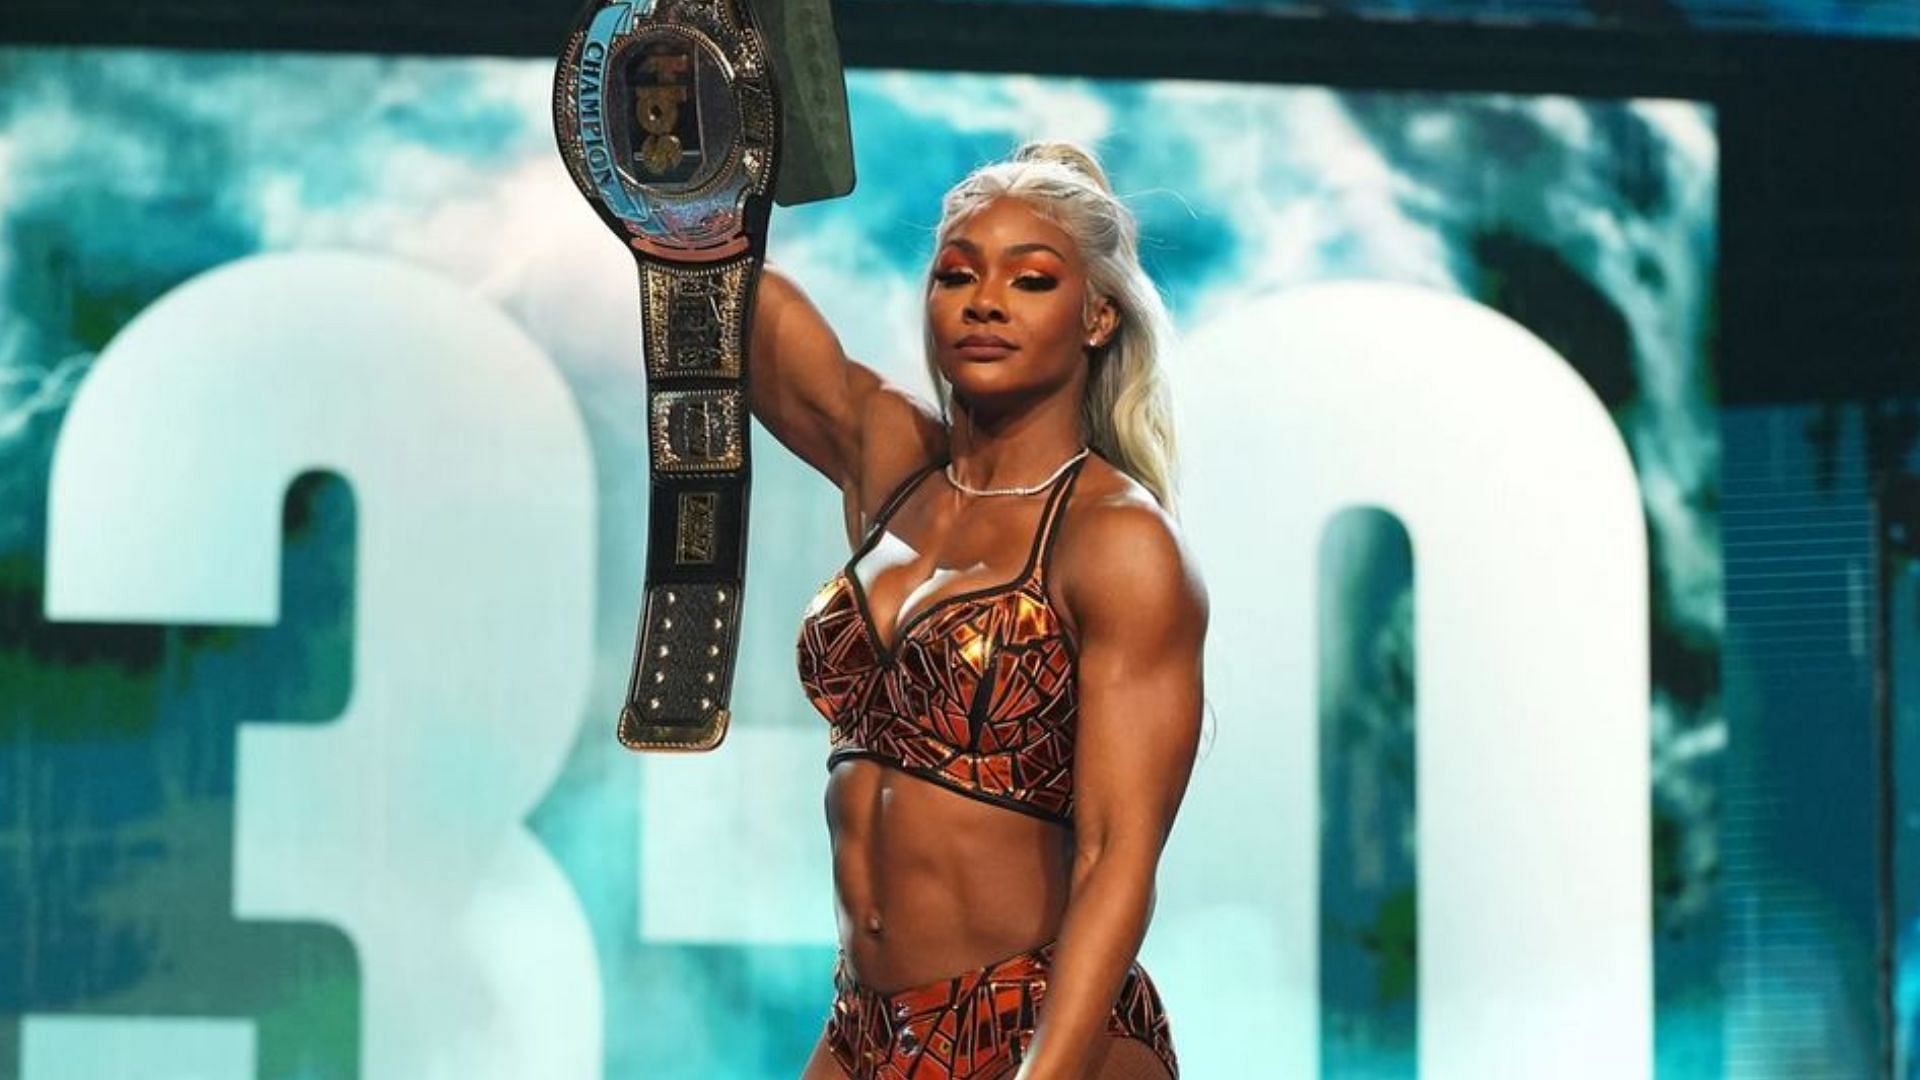 Will Jade Cargill return to AEW to reclaim her TBS Championship any time soon?